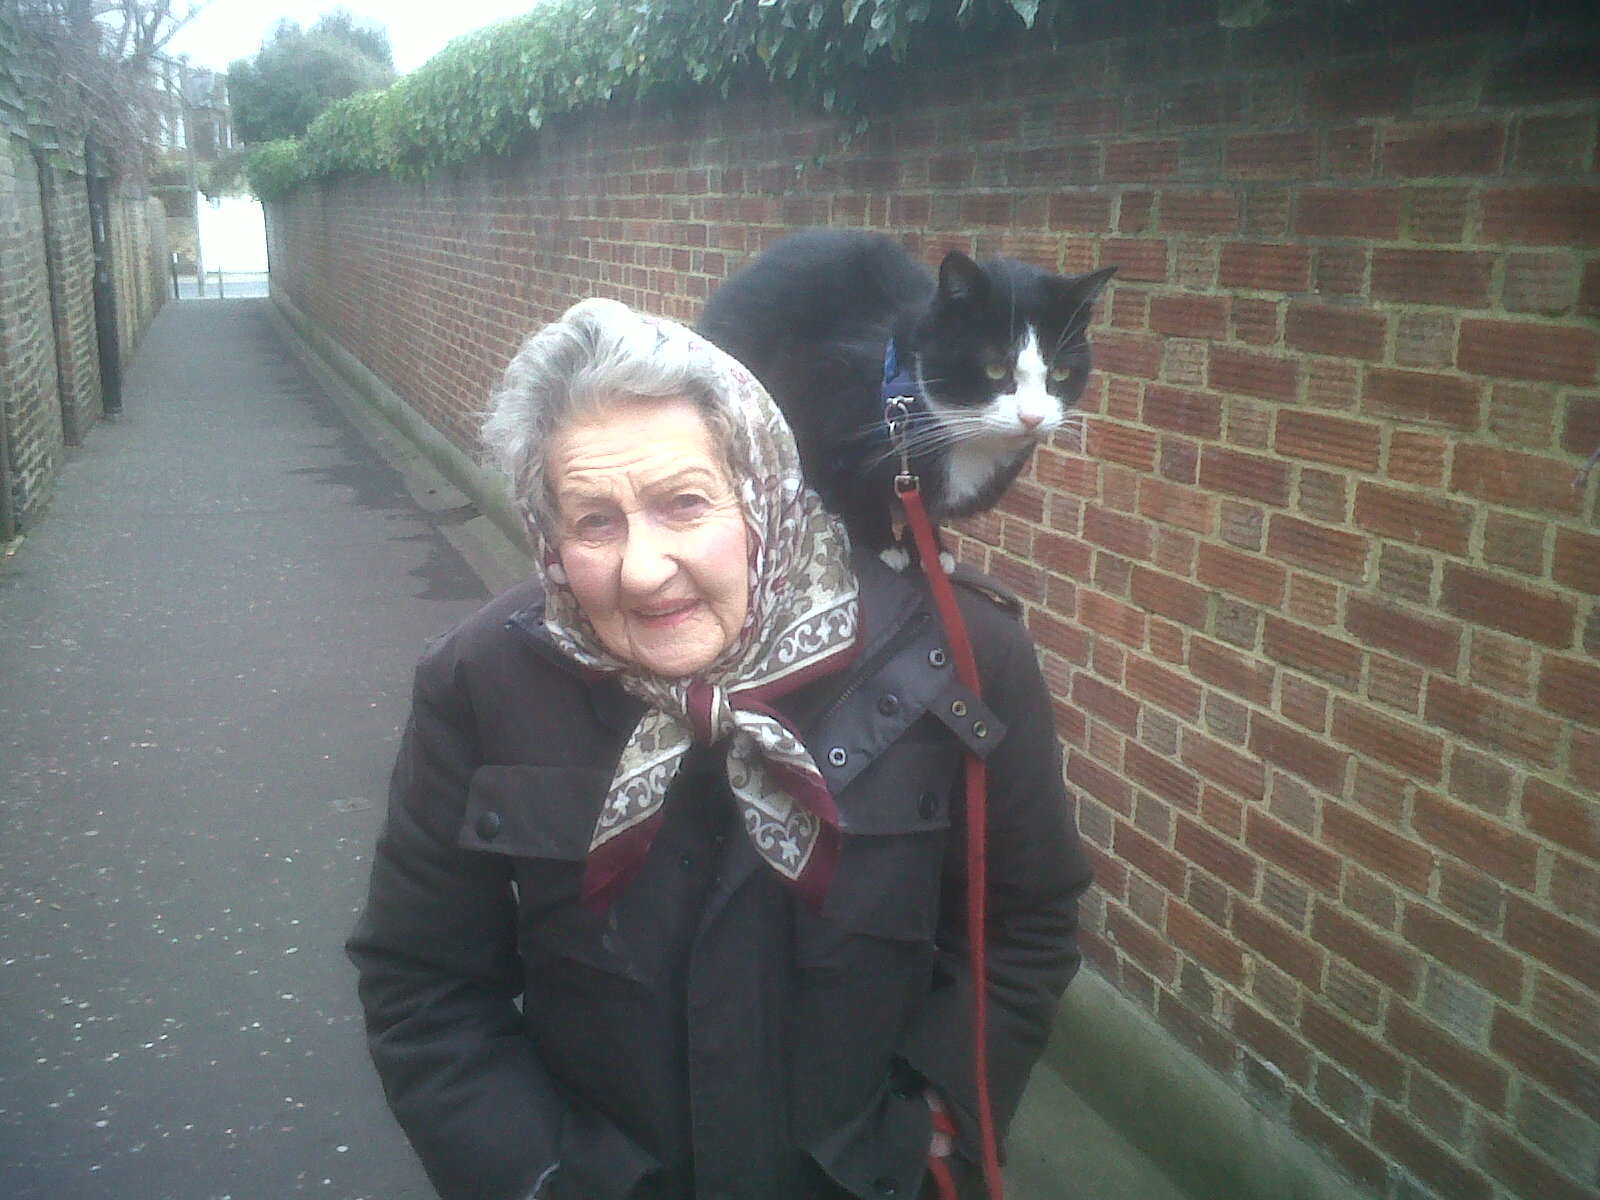 This old lady takes her cat for walks like this every day pics